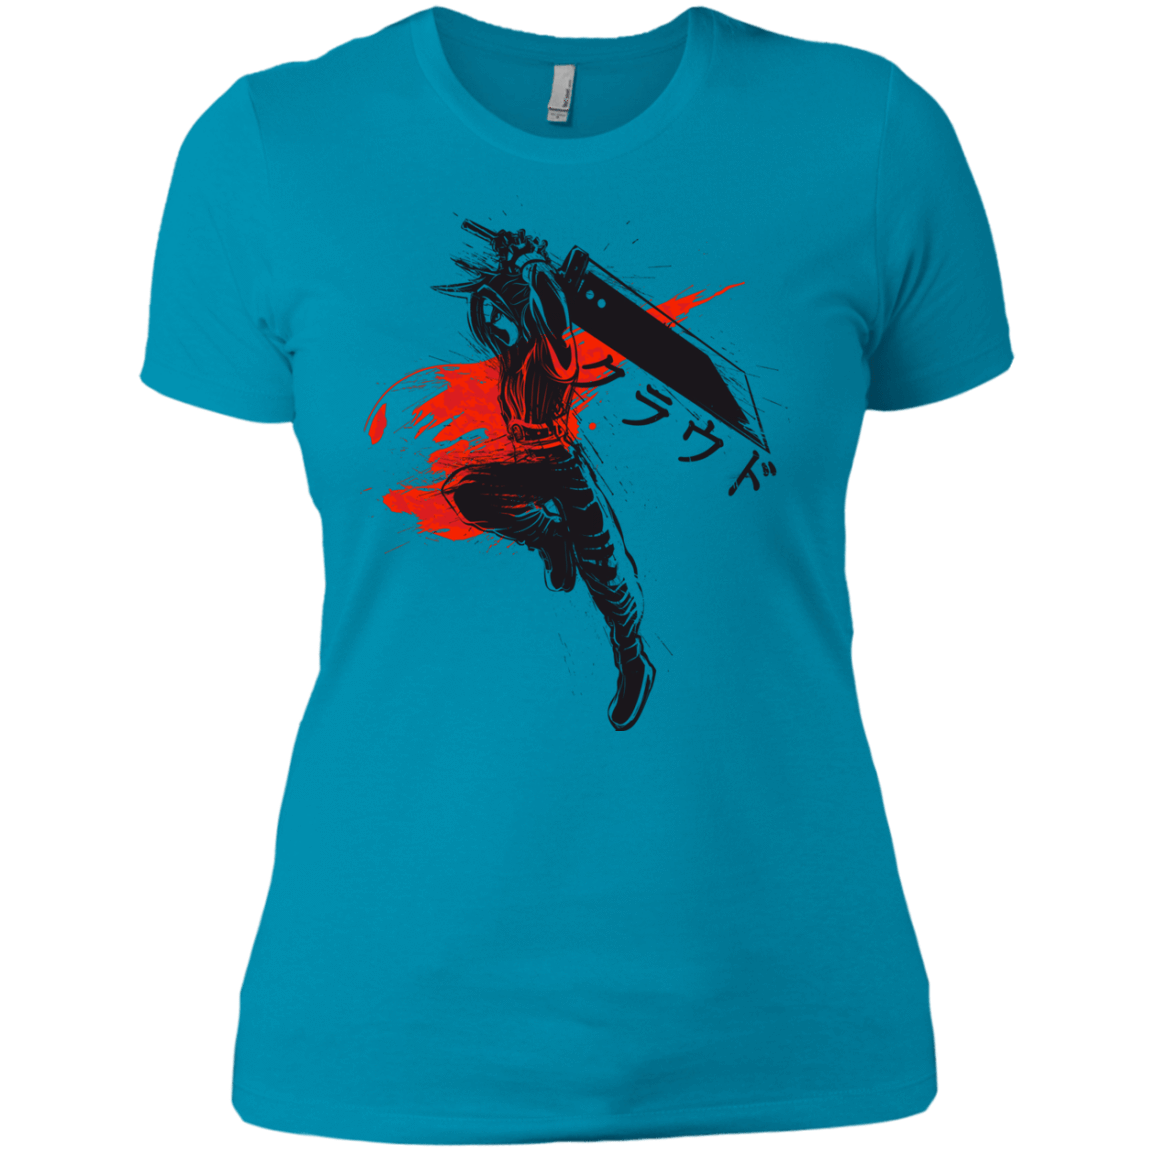 T-Shirts Turquoise / X-Small Traditional Soldier Women's Premium T-Shirt